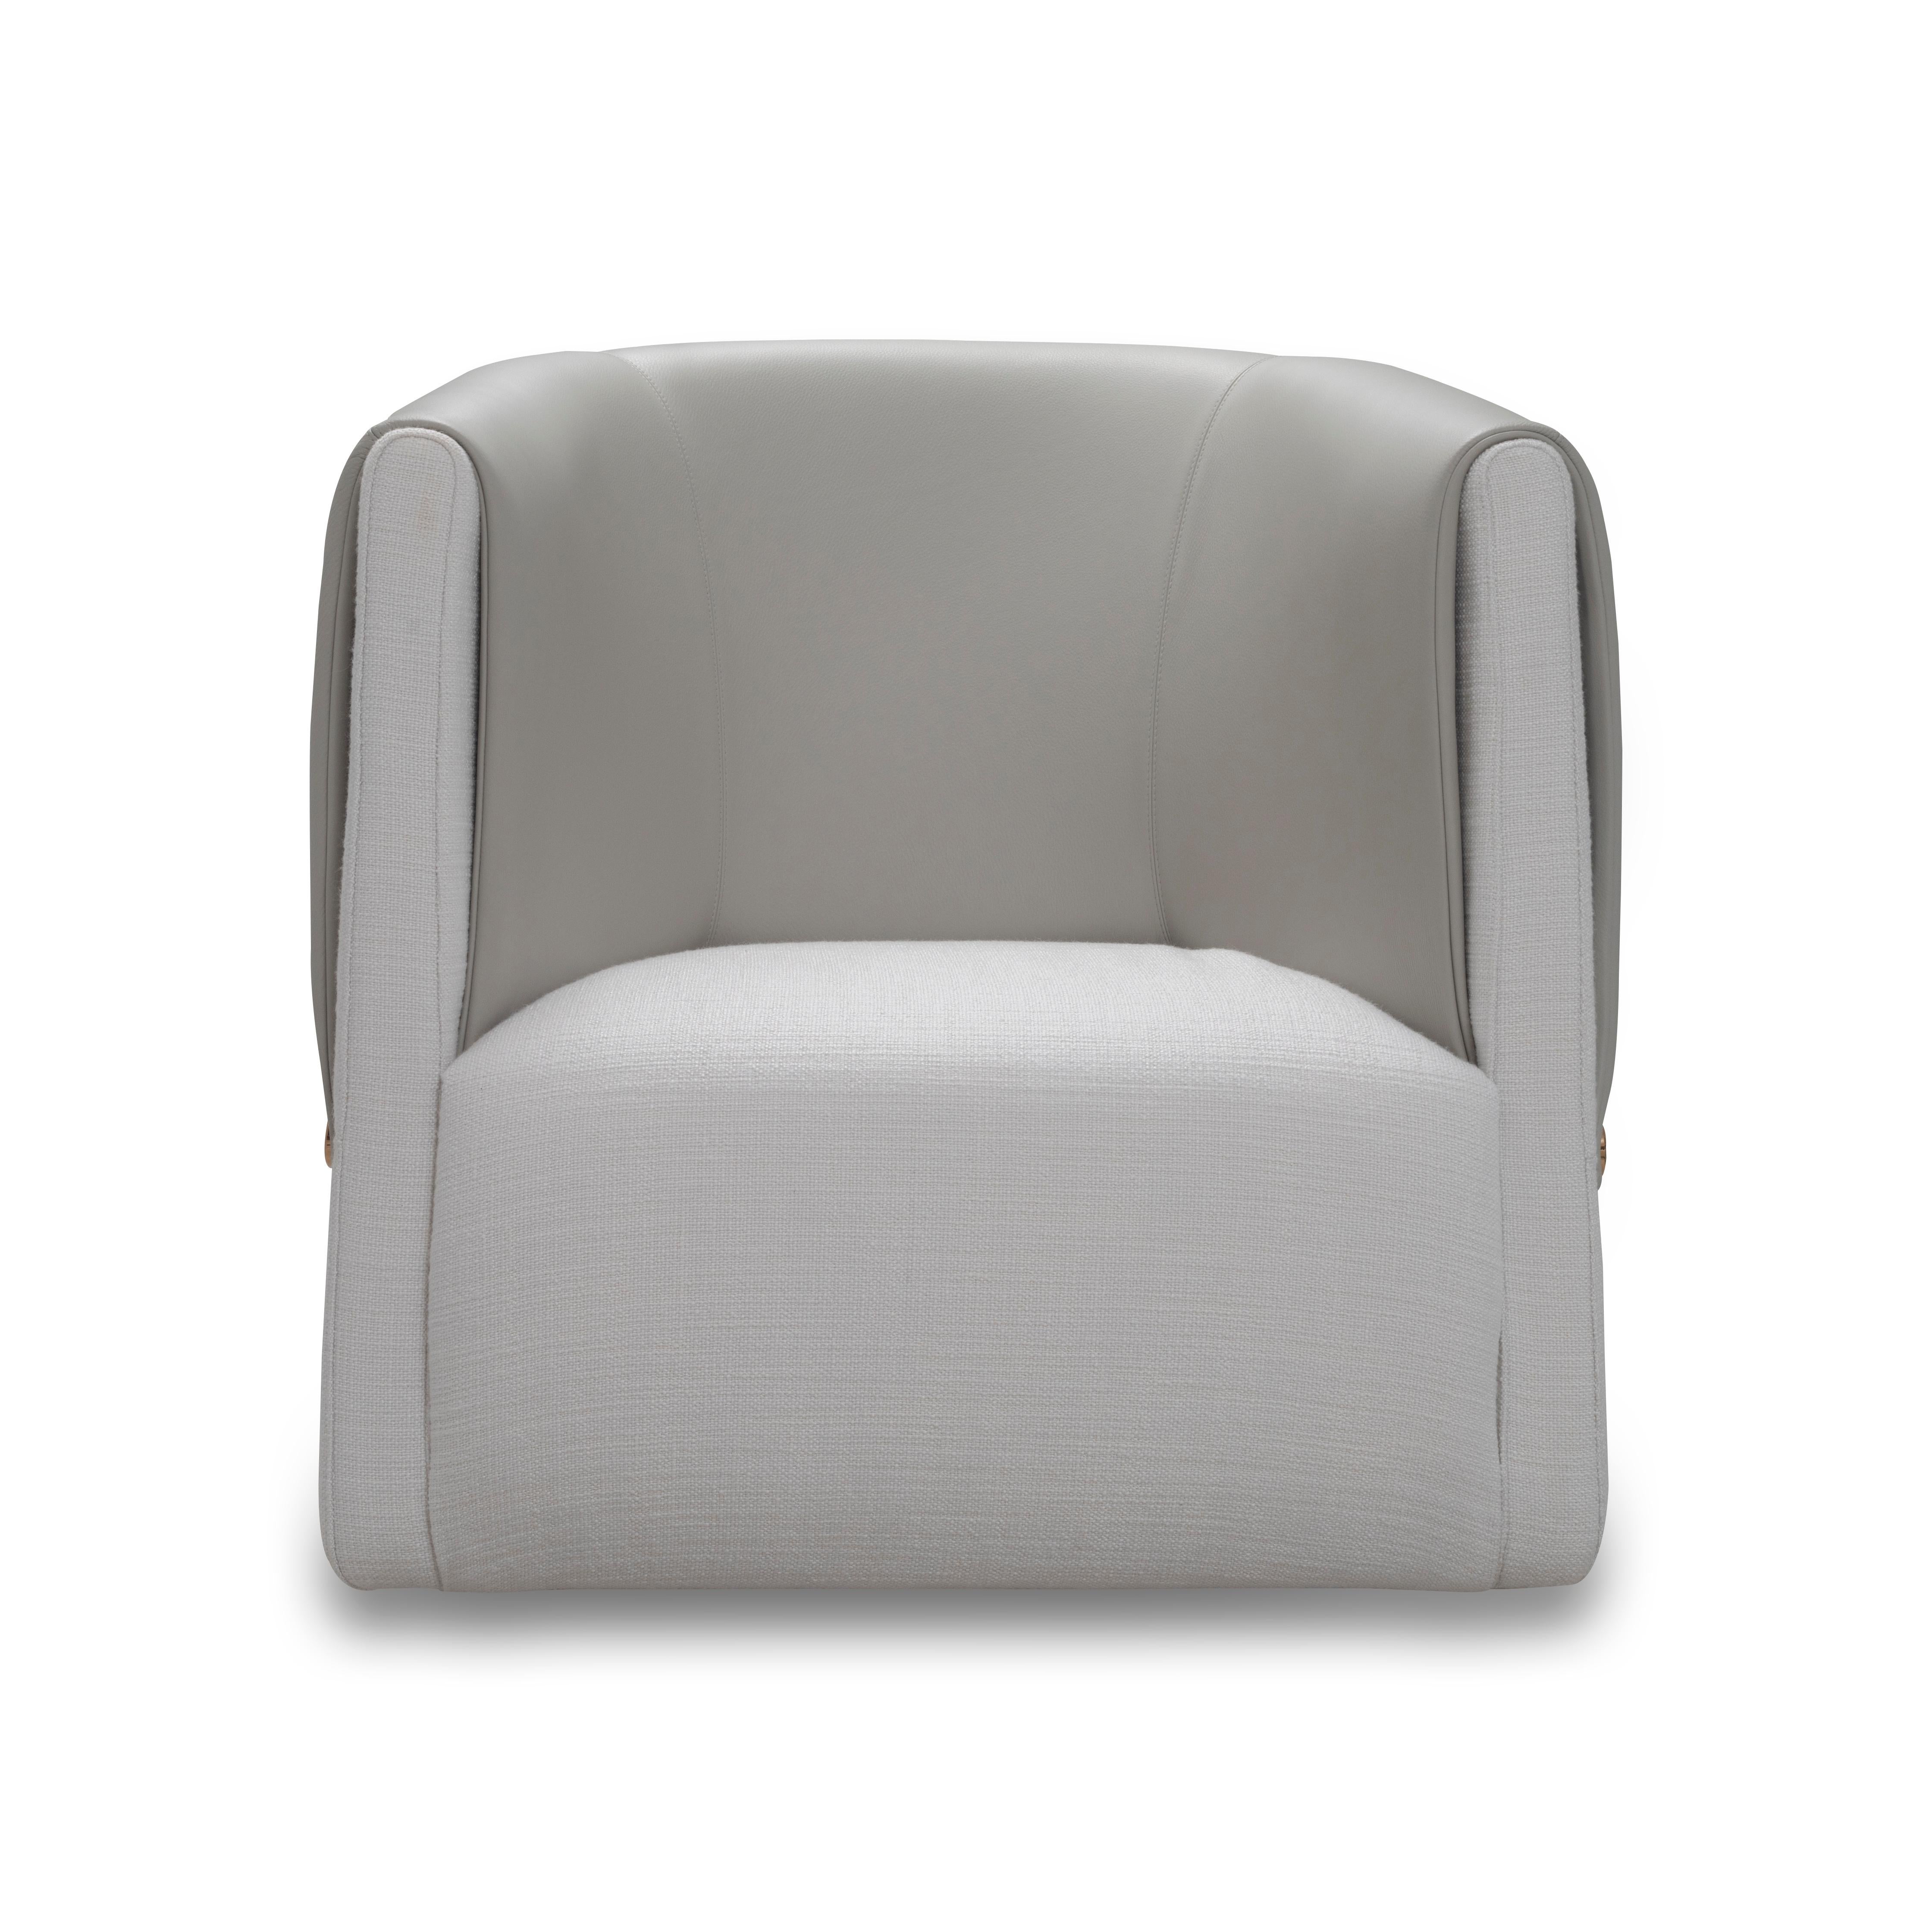 The design of the MANCHETTA club chair is inspired by the elegance of a man‘s cuffs. The conically shaped body solidly grounds on a swivel base and is graced by an overlaying plush upholstered cover, perfectly fitted and enriched with a decorative